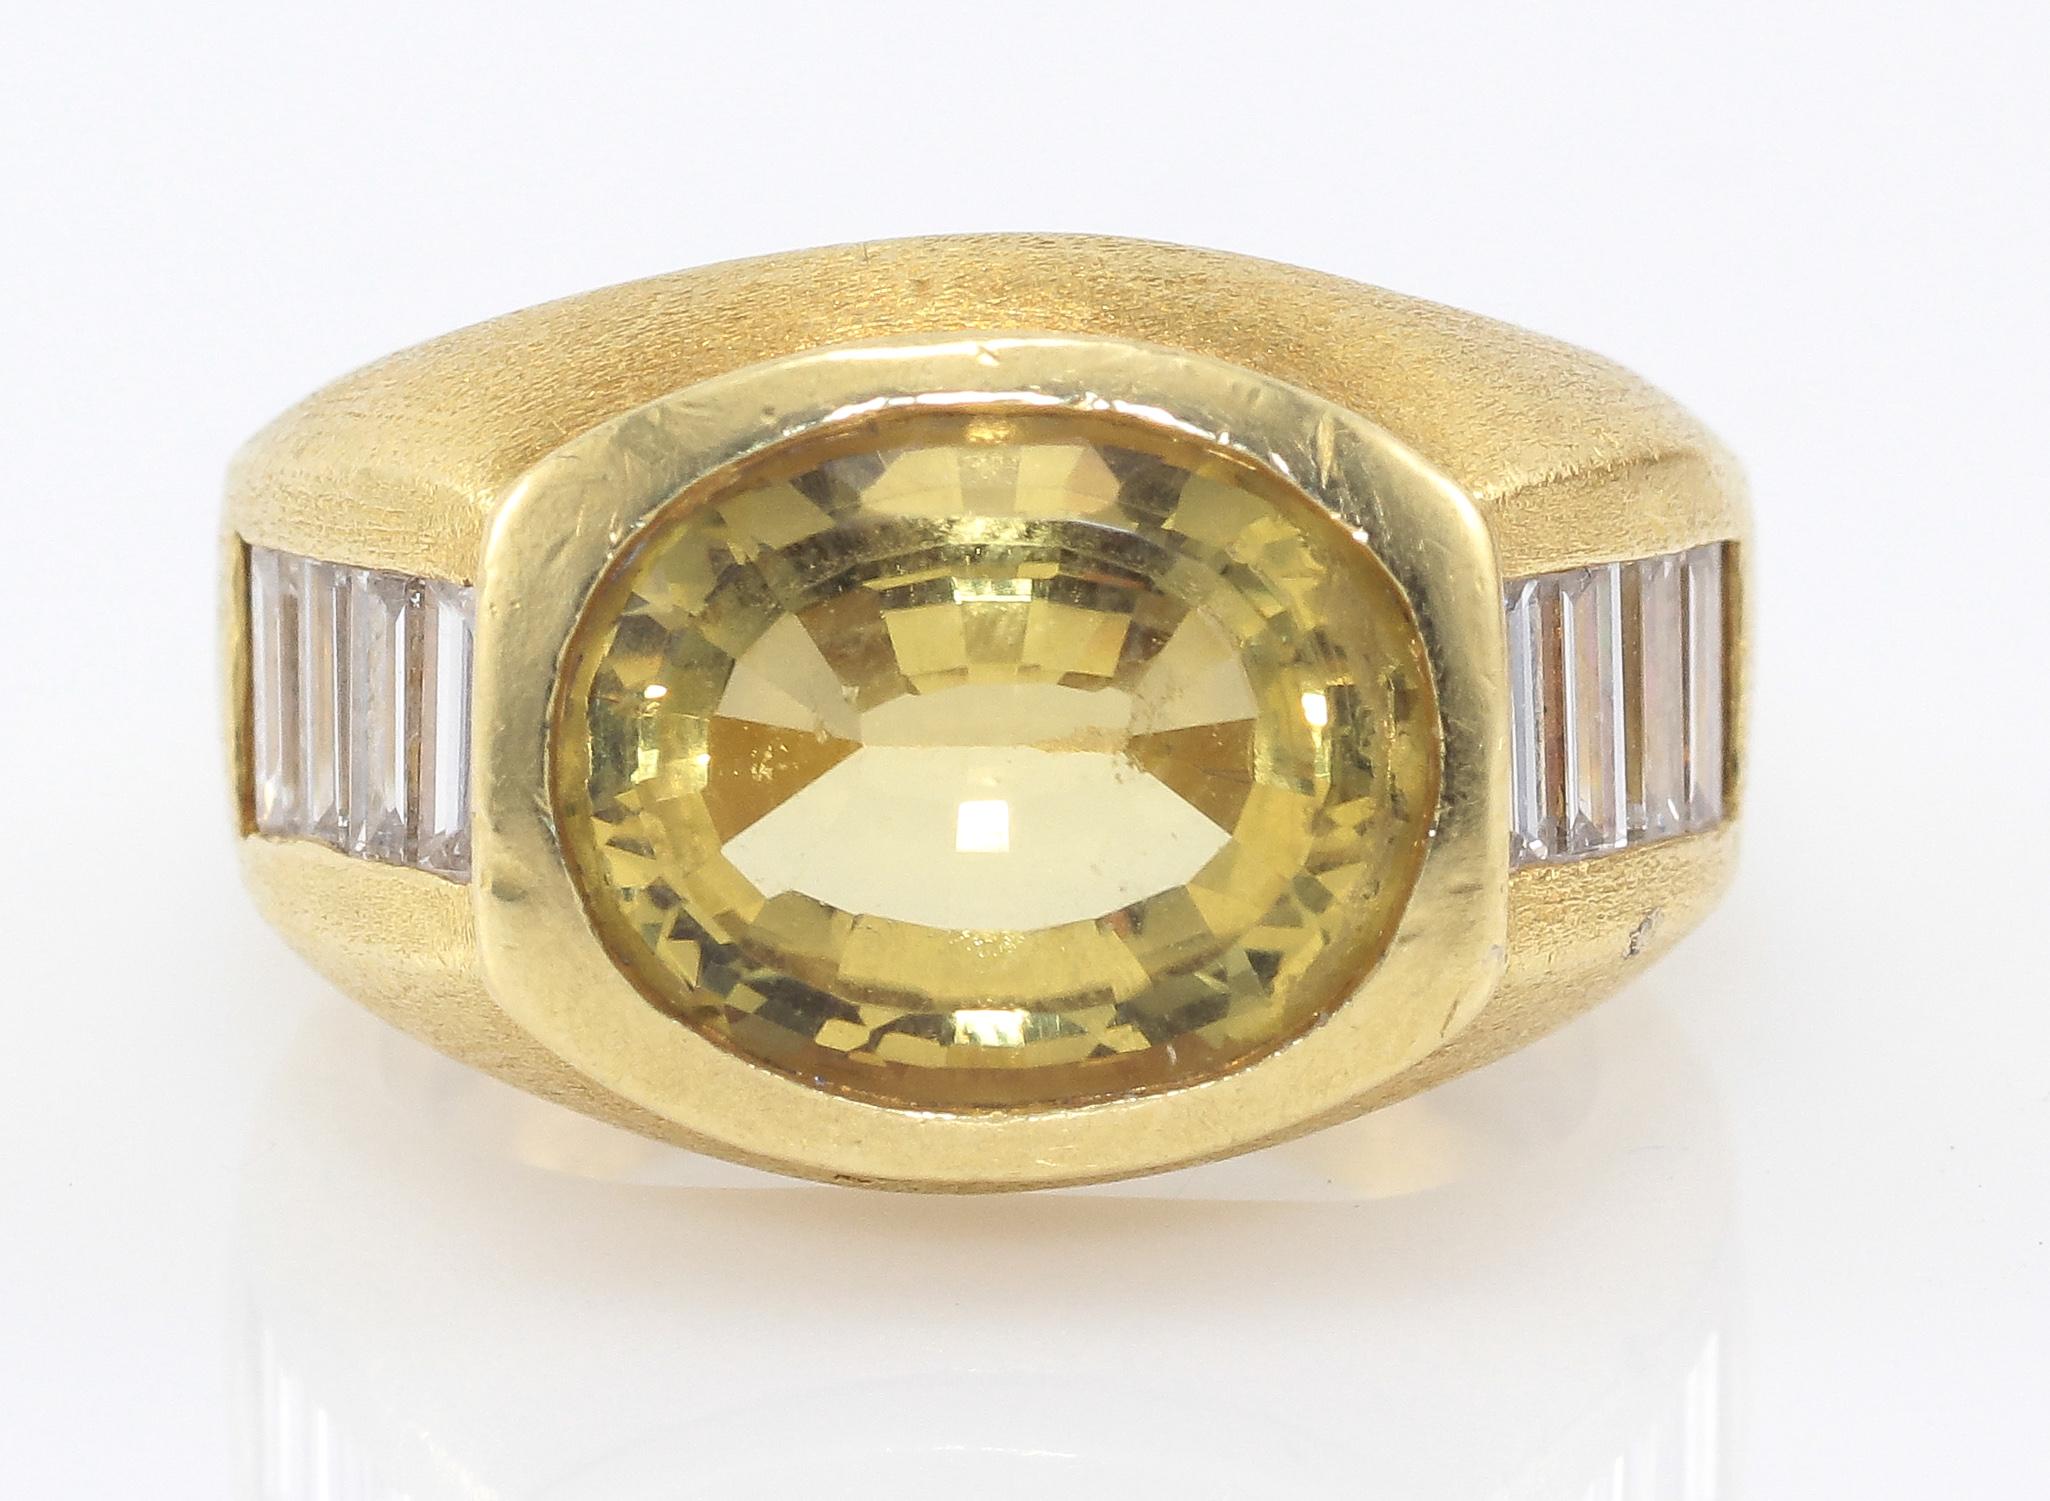 This is a very special 18K Yellow Gold Kieselstein-Cord Chrysoberyl and Diamond Baguette Ring. The Oval Chrysoberyl is approximately 4 ct. and has (8) Diamond Baguettes of aproximately 1.15ctw with F-G Color and VS Clarity along the sides. A